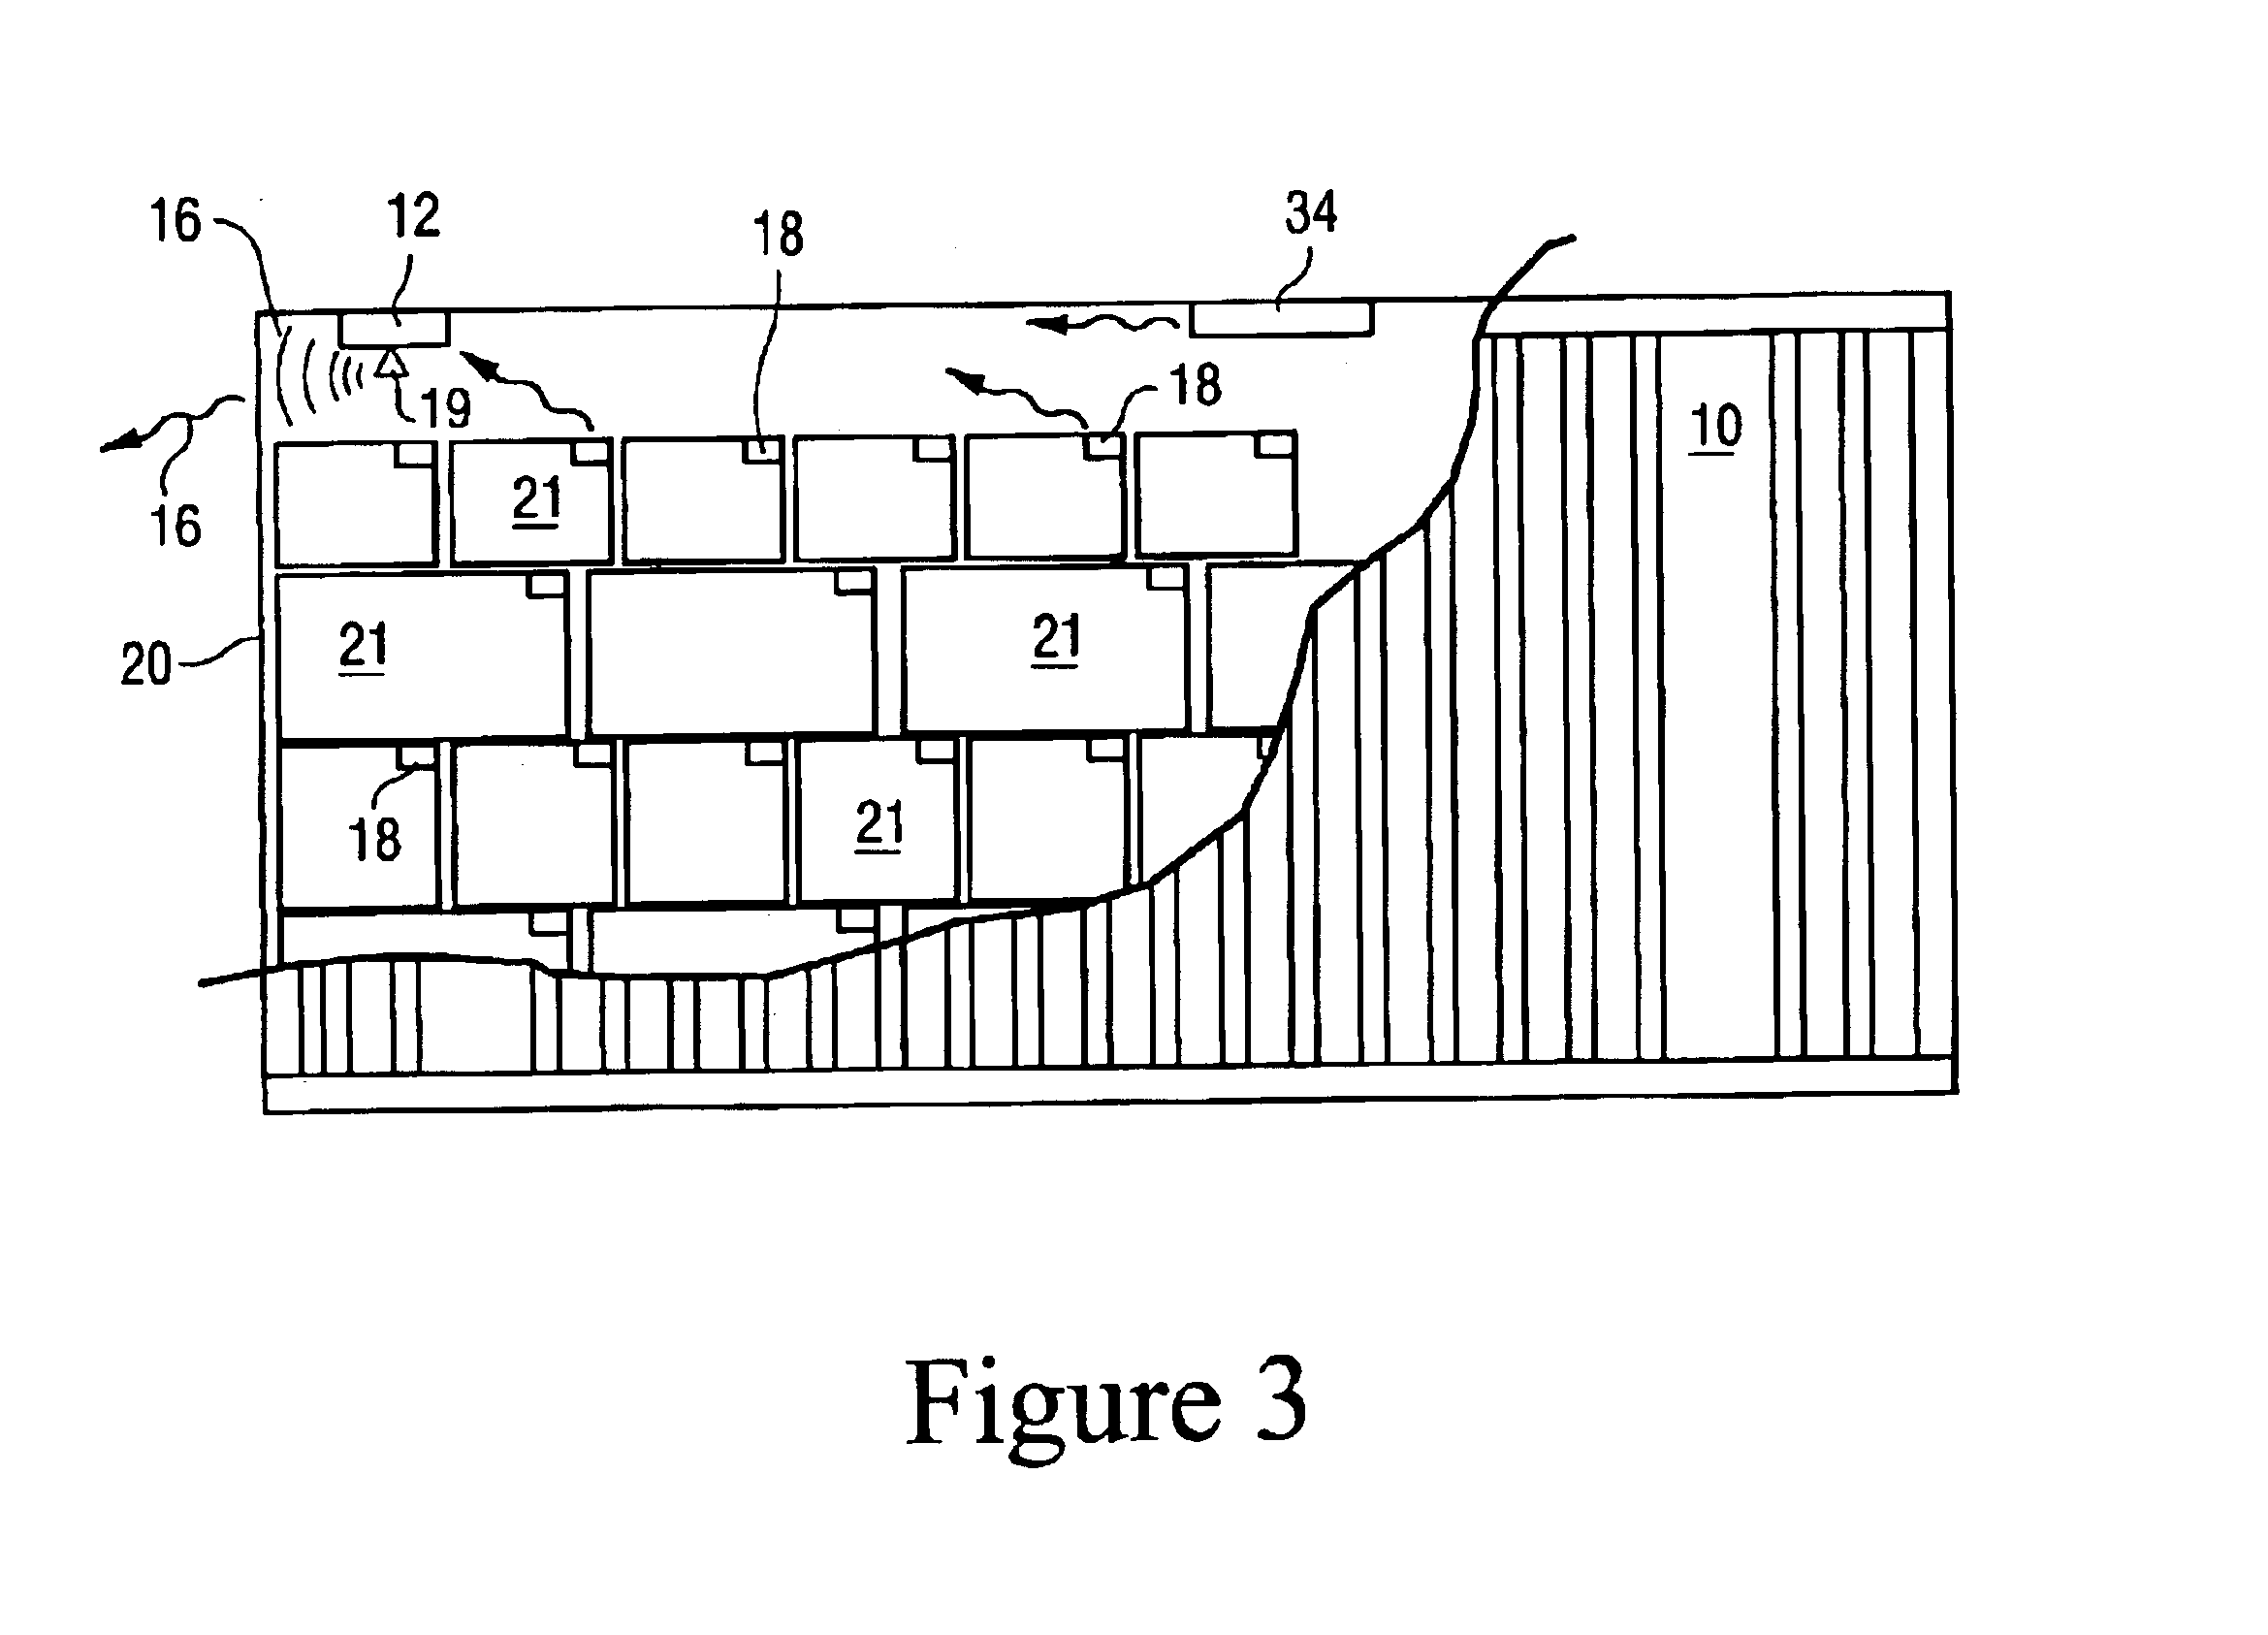 Method for enabling communication and condition monitoring from inside of a sealed shipping container using impulse radio wireless techniques